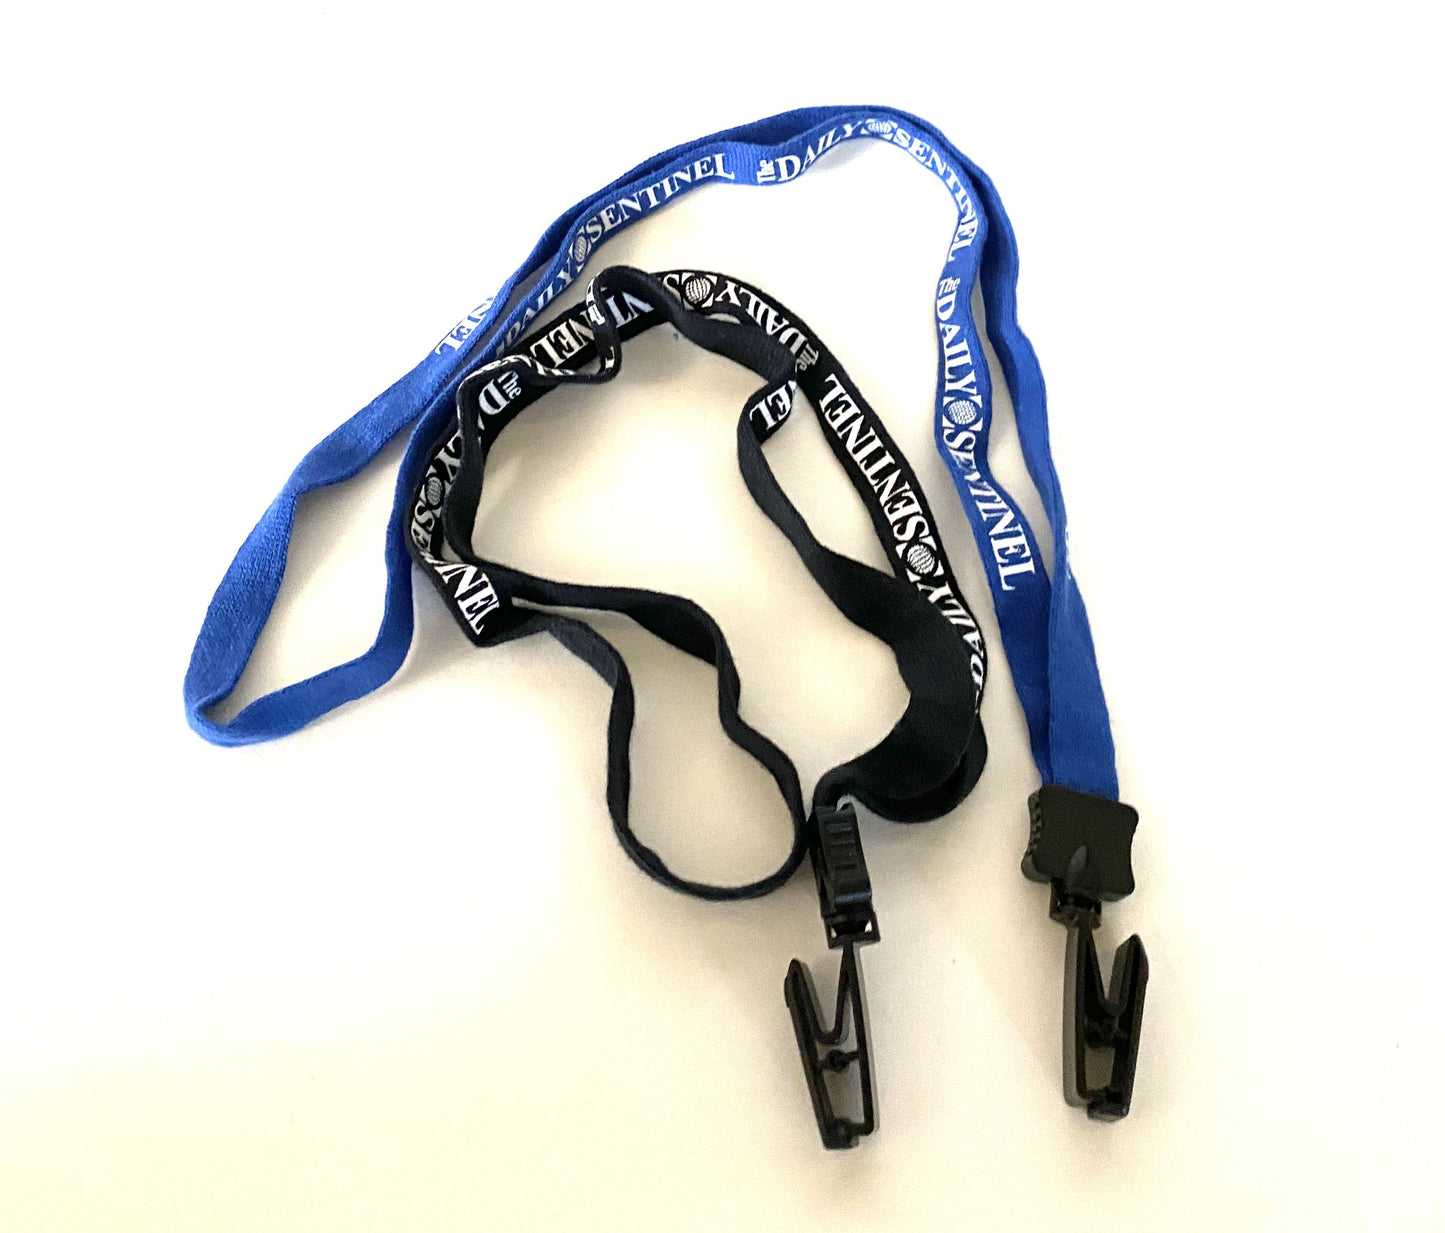 The Green Hornet: Daily Sentinel Newspaper Lanyards (2)